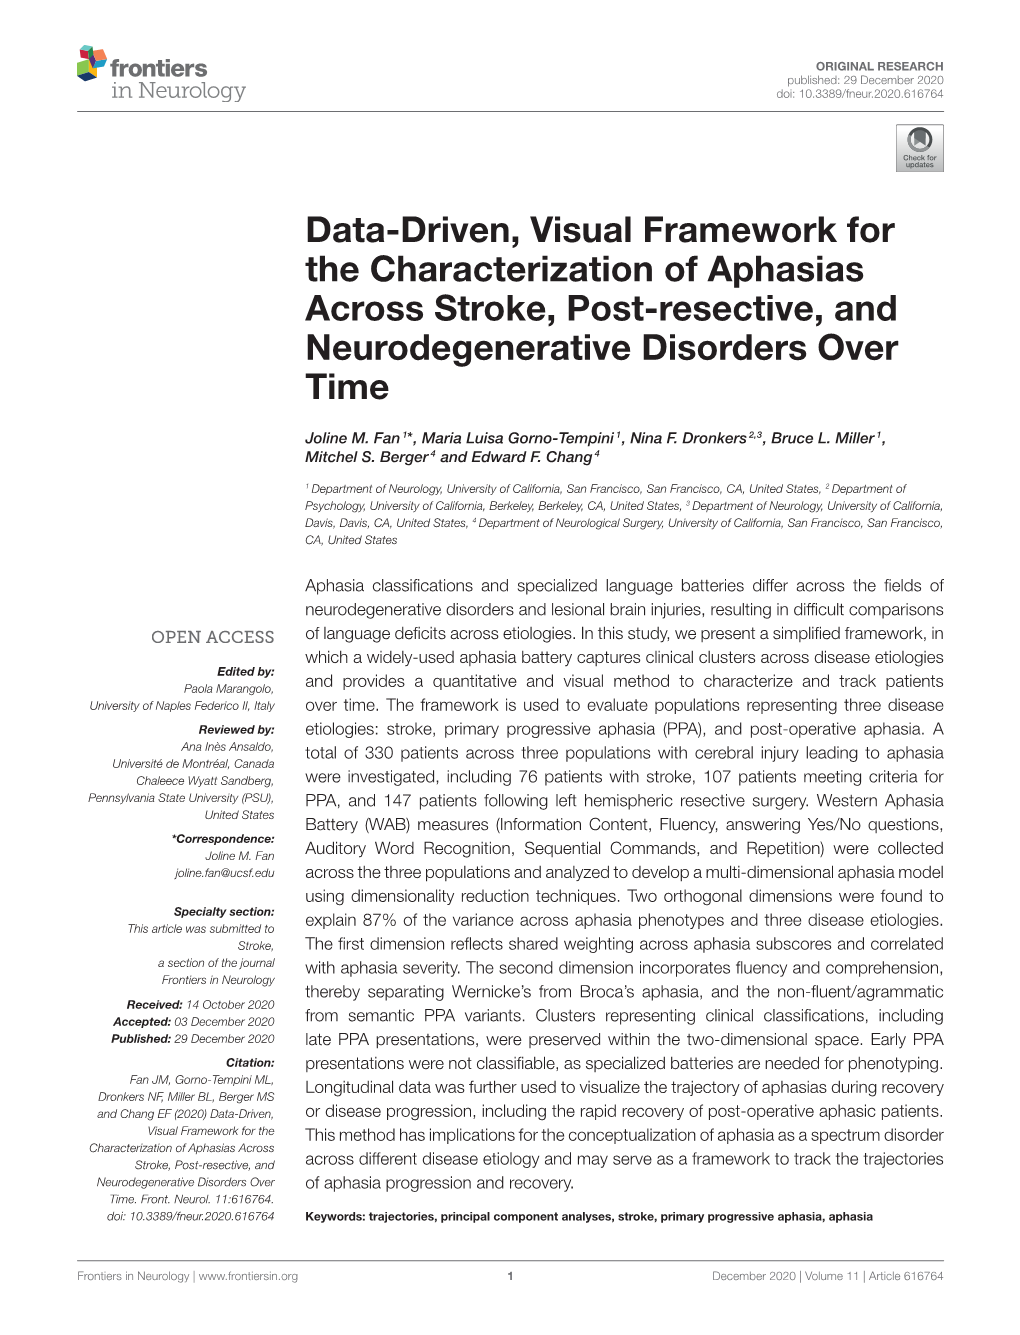 Data-Driven, Visual Framework for the Characterization of Aphasias Across Stroke, Post-Resective, and Neurodegenerative Disorders Over Time